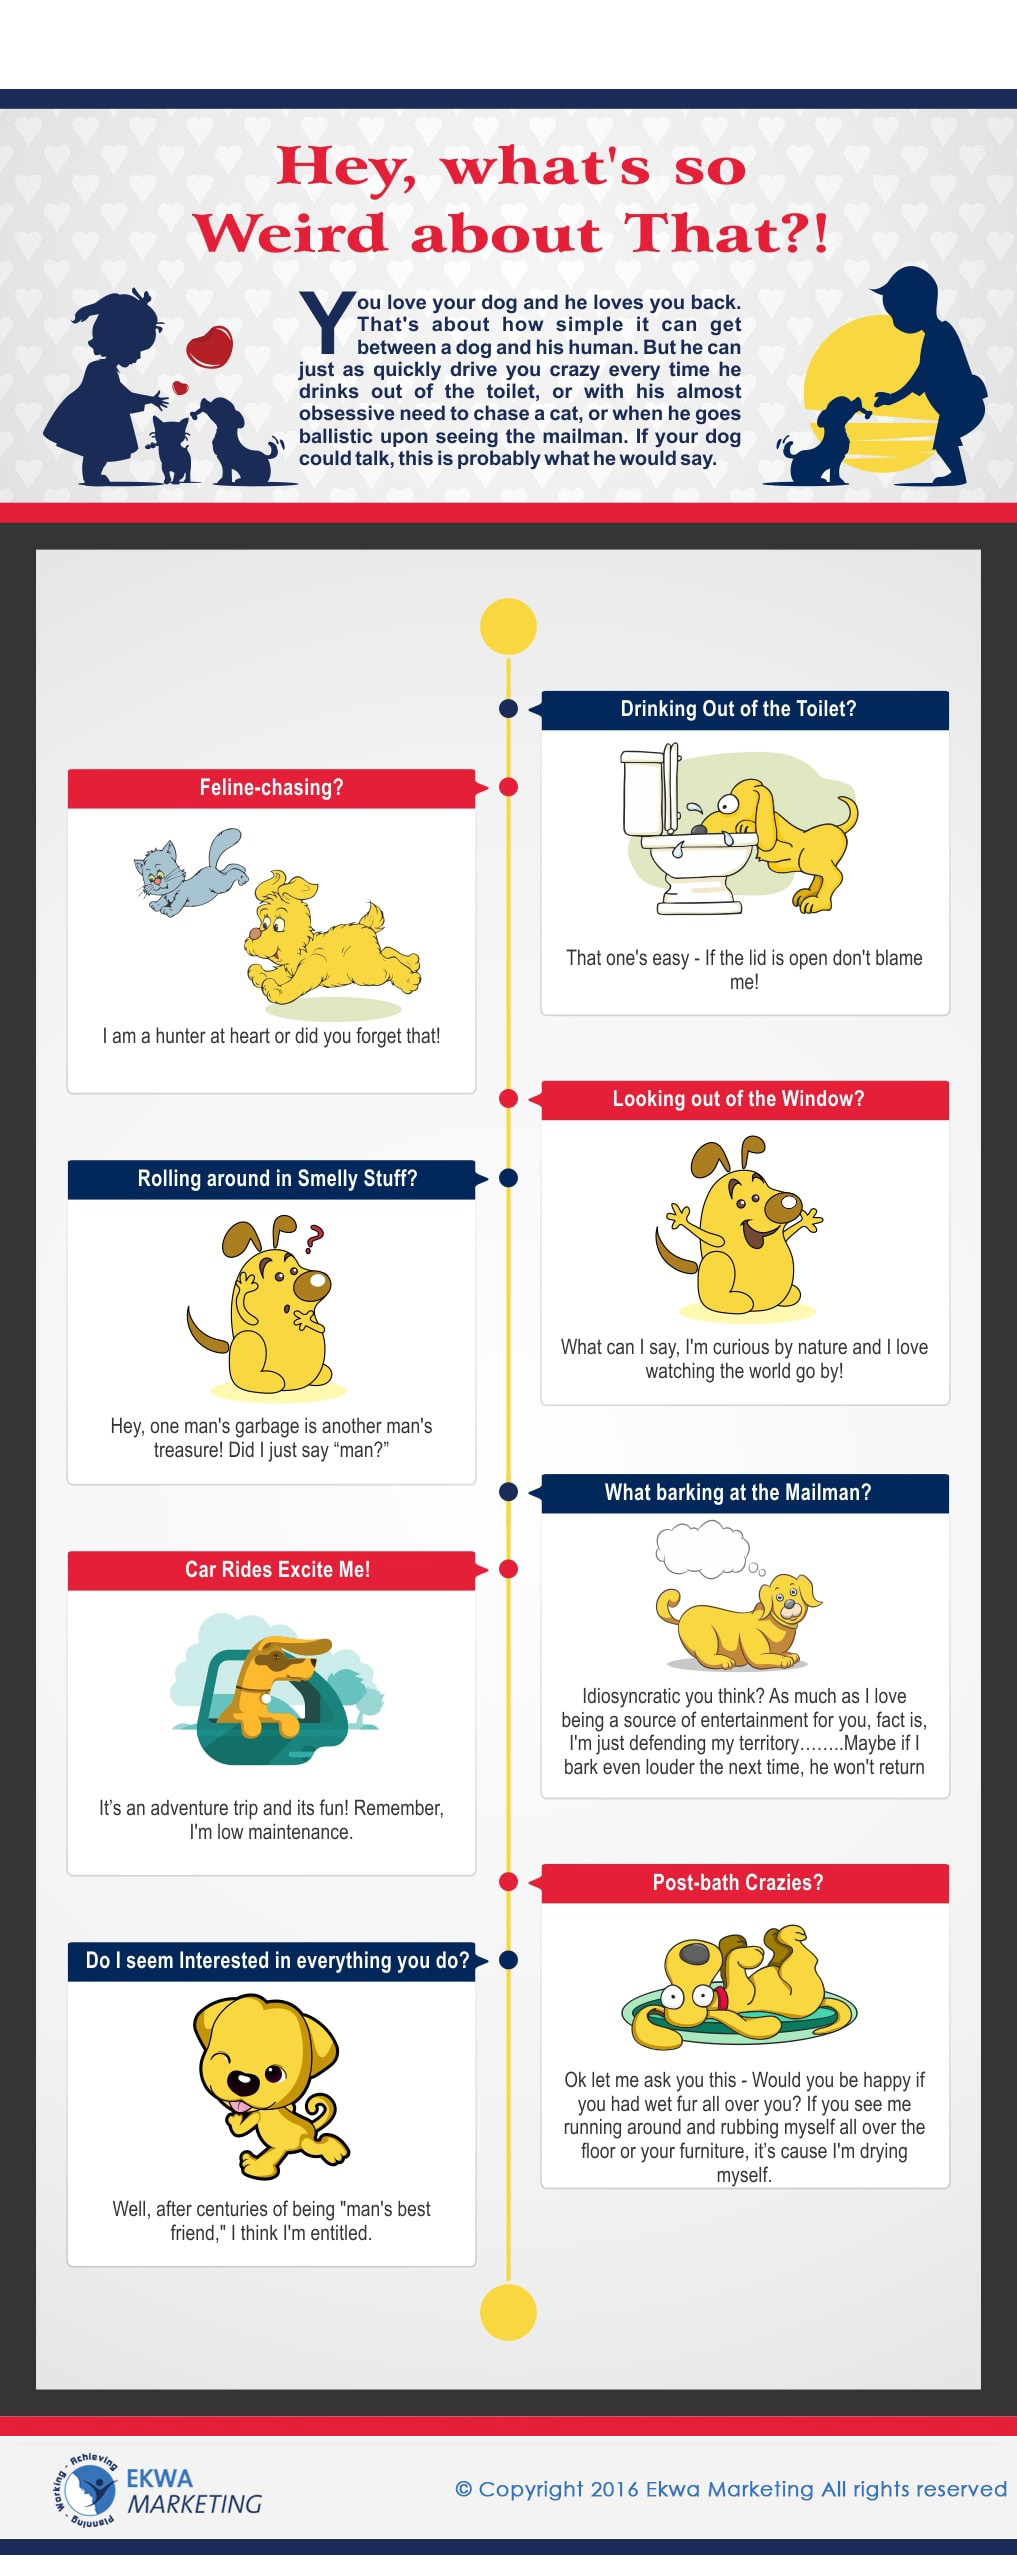 Veterinary Info Graphics, Hey, what's so Weird about That?